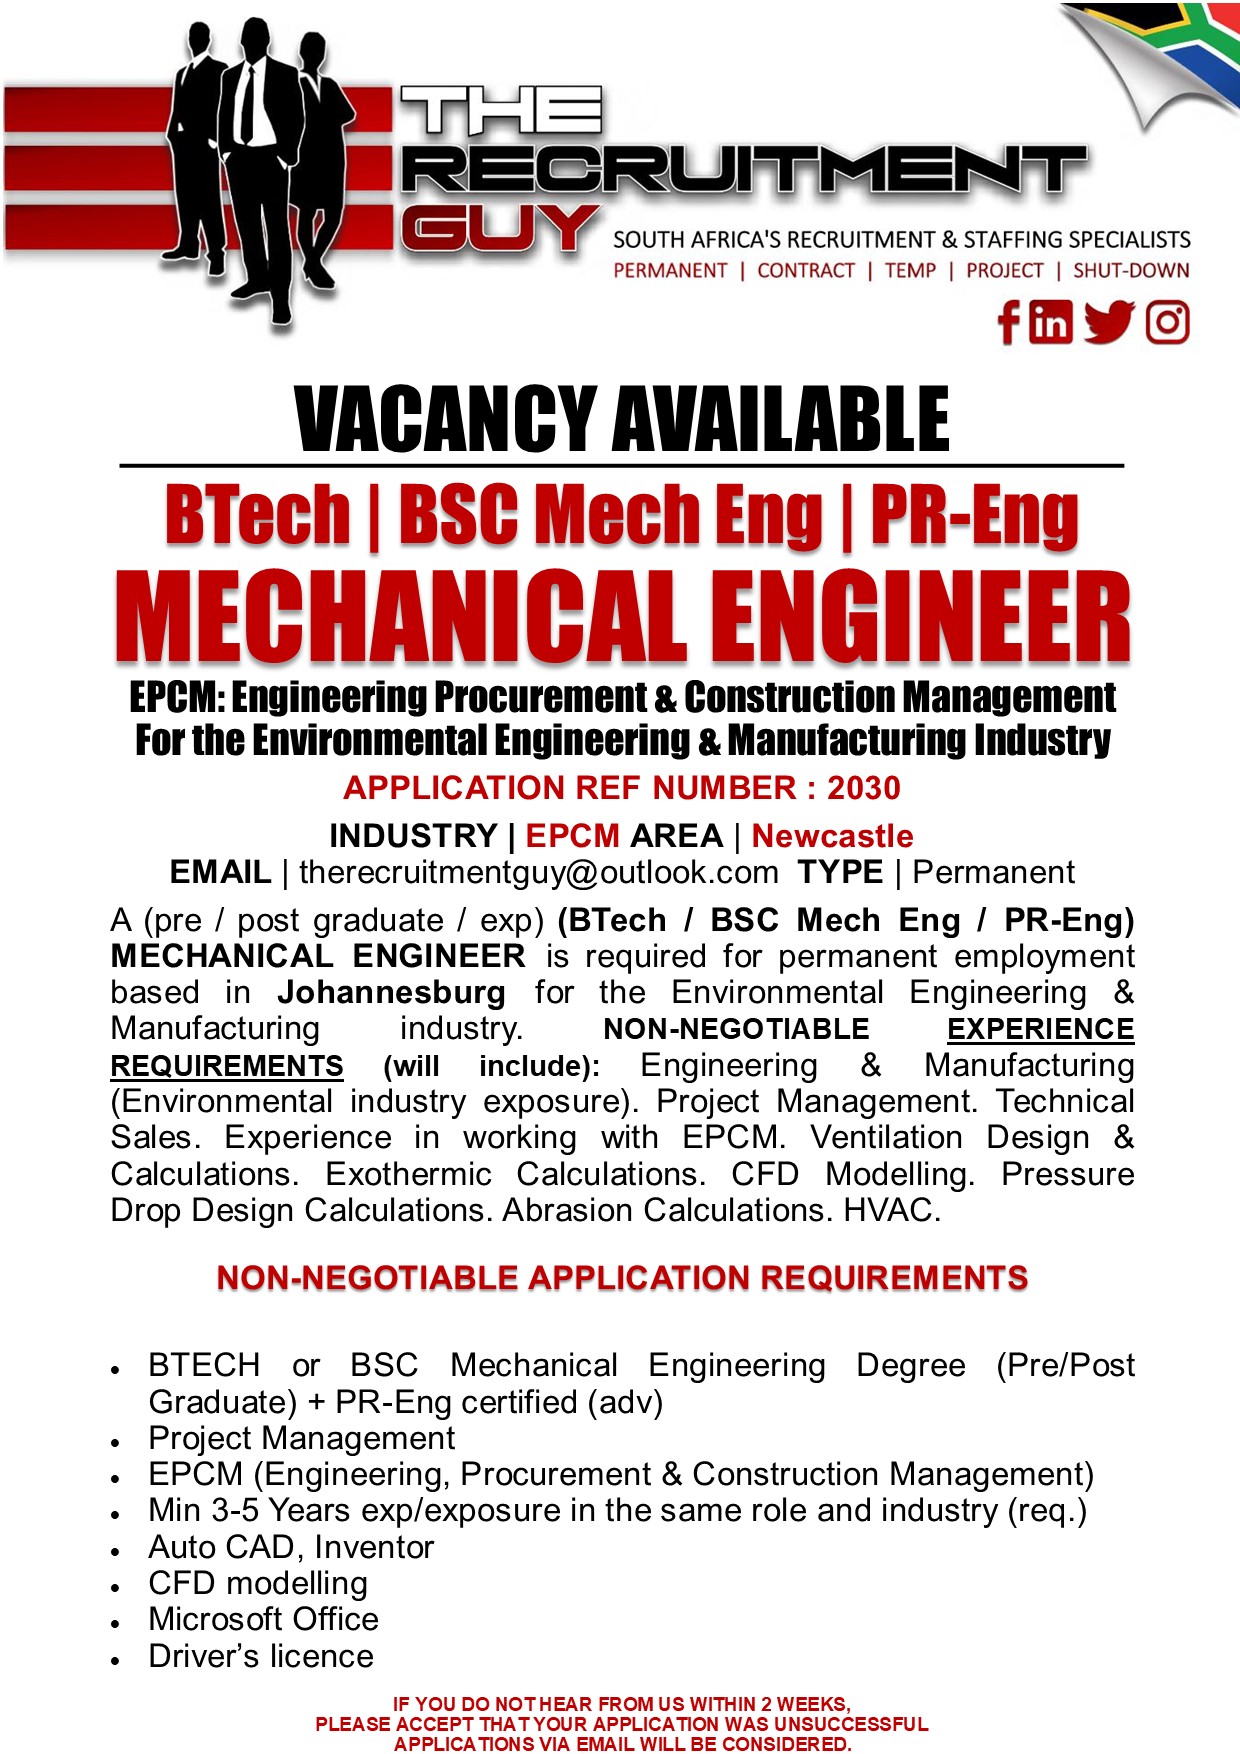 GN SOUTH AFRICA'S RECRUITMENT & STAFFING SPECIALISTS

PERMANENT | CONTRACT | TEMP | PROJECT | SHUT-DOWN

{ink JG]

 

VACANCY AVAILABLE
BTech | BSC Mech Eng | PR-Eng

MECHANICAL ENGINEER

EPCM: Engineering Procurement & Construction Management
For the Environmental Engineering & Manufacturing Industry
APPLICATION REF NUMBER : 2030

INDUSTRY | EPCM AREA | Newcastle
EMAIL | therecruitmentguy@outlook.com TYPE | Permanent

A (pre / post graduate / exp) (BTech / BSC Mech Eng / PR-Eng)
MECHANICAL ENGINEER is required for permanent employment
based in Johannesburg for the Environmental Engineering &
Manufacturing industry. NON-NEGOTIABLE EXPERIENCE
REQUIREMENTS (will include): Engineering & Manufacturing
(Environmental industry exposure). Project Management. Technical
Sales. Experience in working with EPCM. Ventilation Design &
Calculations. Exothermic Calculations. CFD Modelling. Pressure
Drop Design Calculations. Abrasion Calculations. HVAC.

NON-NEGOTIABLE APPLICATION REQUIREMENTS

« BTECH or BSC Mechanical Engineering Degree (Pre/Post
Graduate) + PR-Eng certified (adv)

Project Management

EPCM (Engineering, Procurement & Construction Management)
Min 3-5 Years exp/exposure in the same role and industry (req.)
Auto CAD, Inventor

CFD modelling

Microsoft Office

Driver's licence

IF YOU DO NOTHEAR FROM US WITHIN 2 WEEKS,
PLEASE ACCEPT THAT YOUR APPLICATION WAS UNSUCCESSFUL
APPLICATIONS VIA EMAIL WILL BE CONSIDERED.